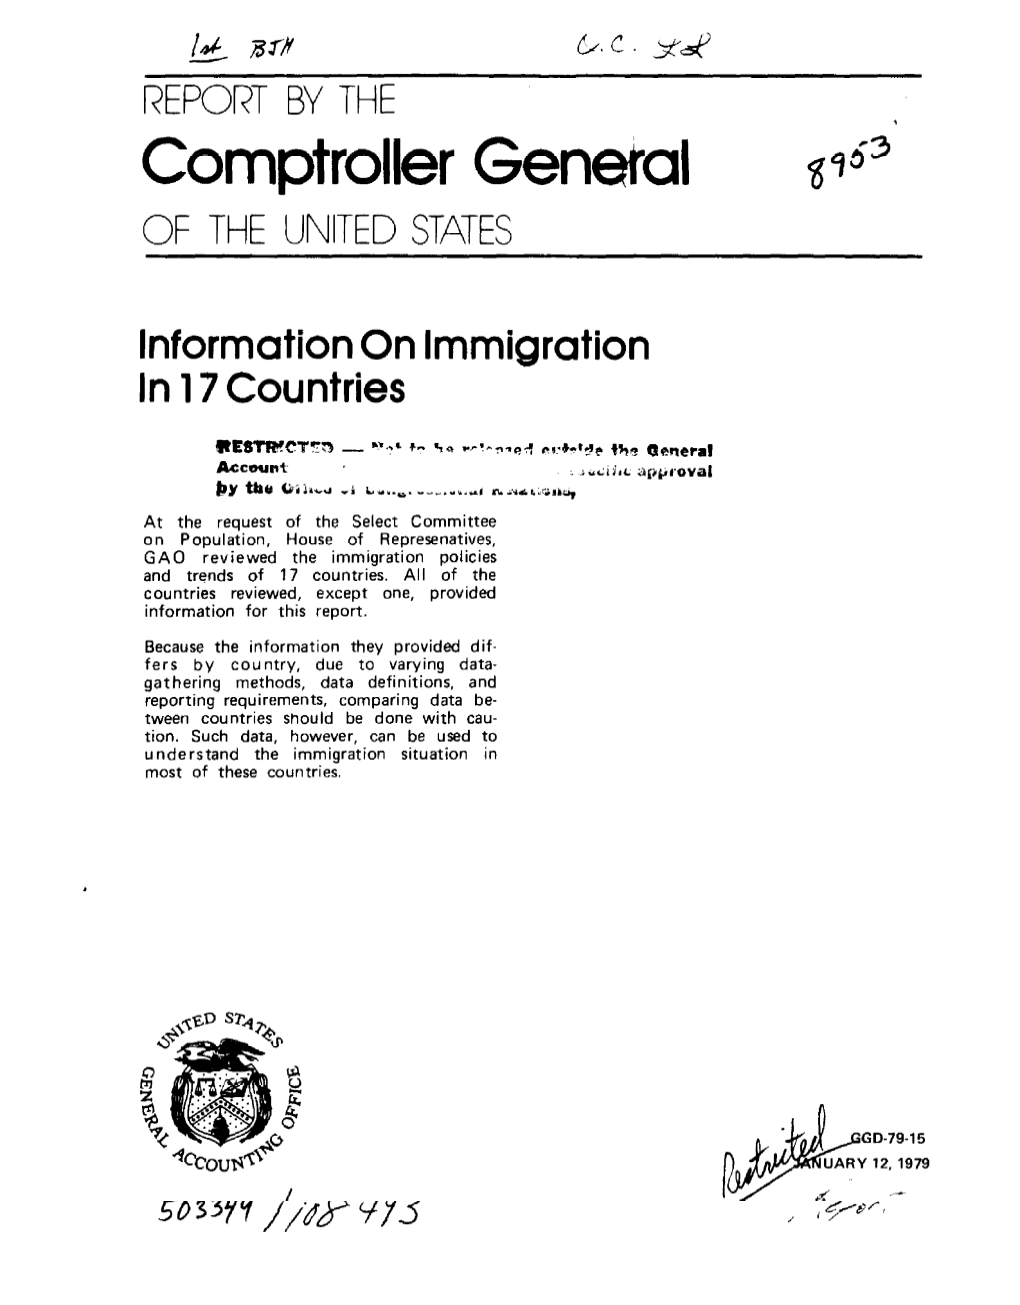 GGD-79-15 Information on Immigration in 17 Countries